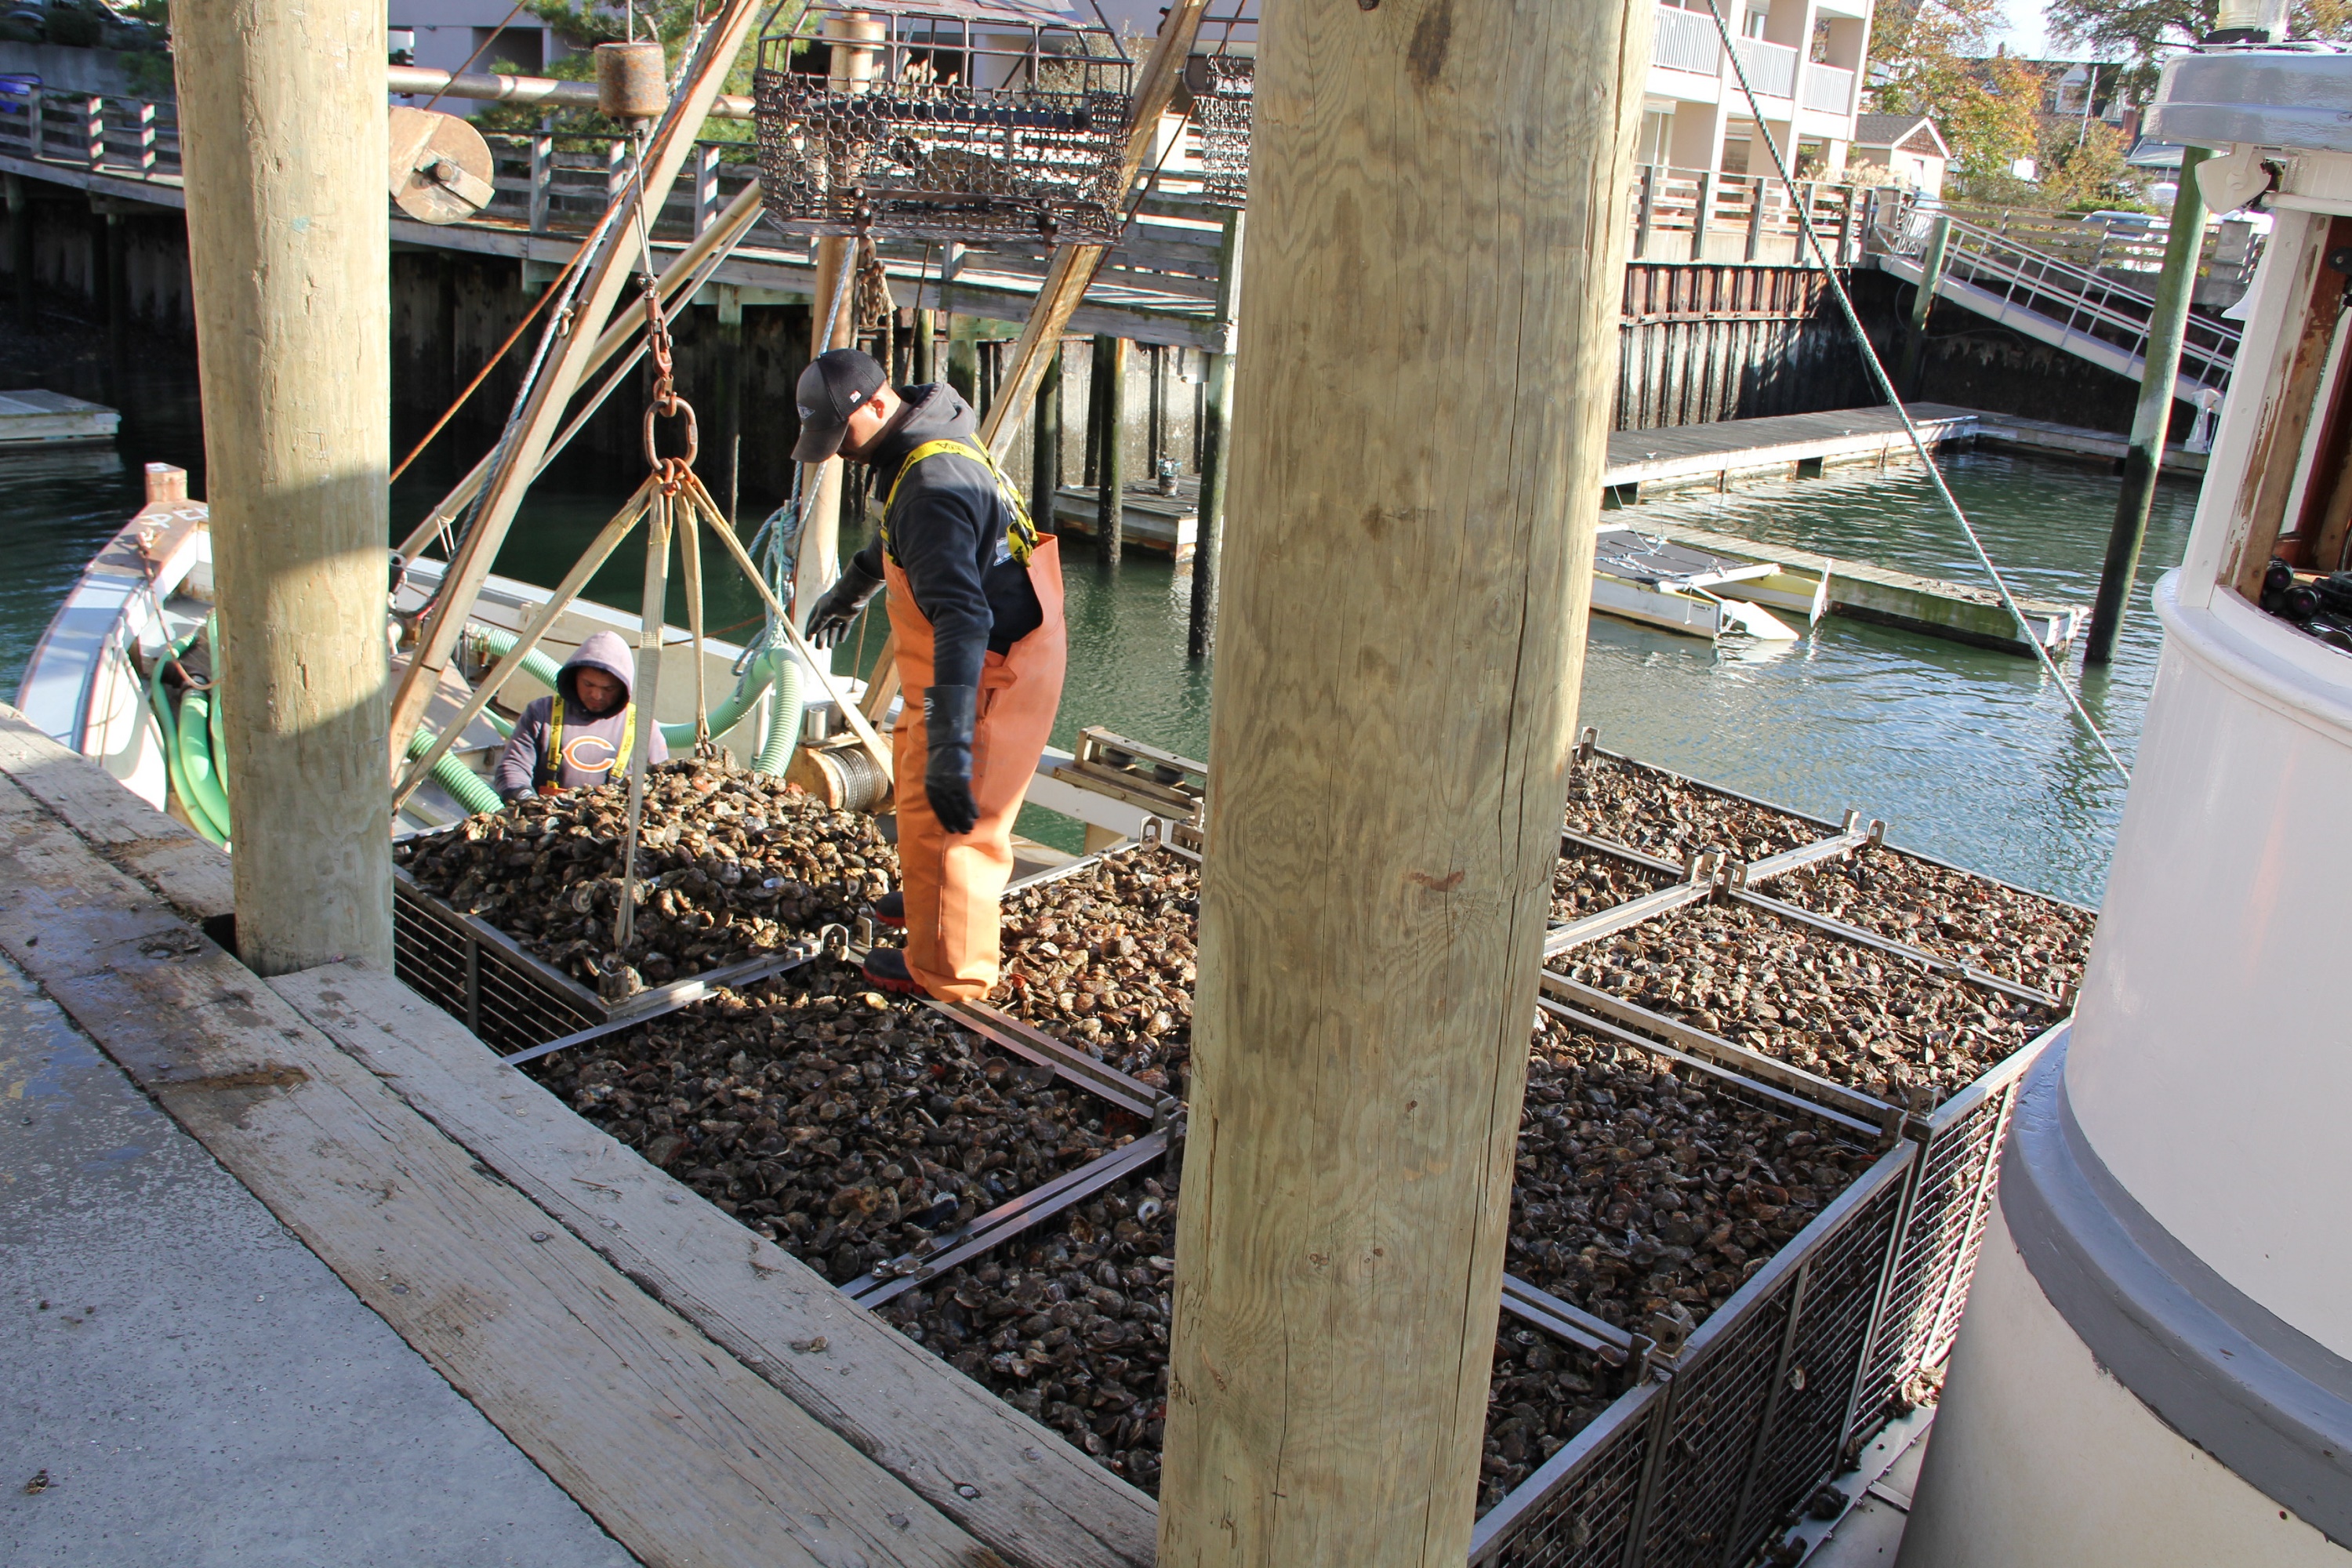 A worker at Norm Bloom & Son Oysters offloads shellfish harvested from the company’s beds in Norwalk harbor.